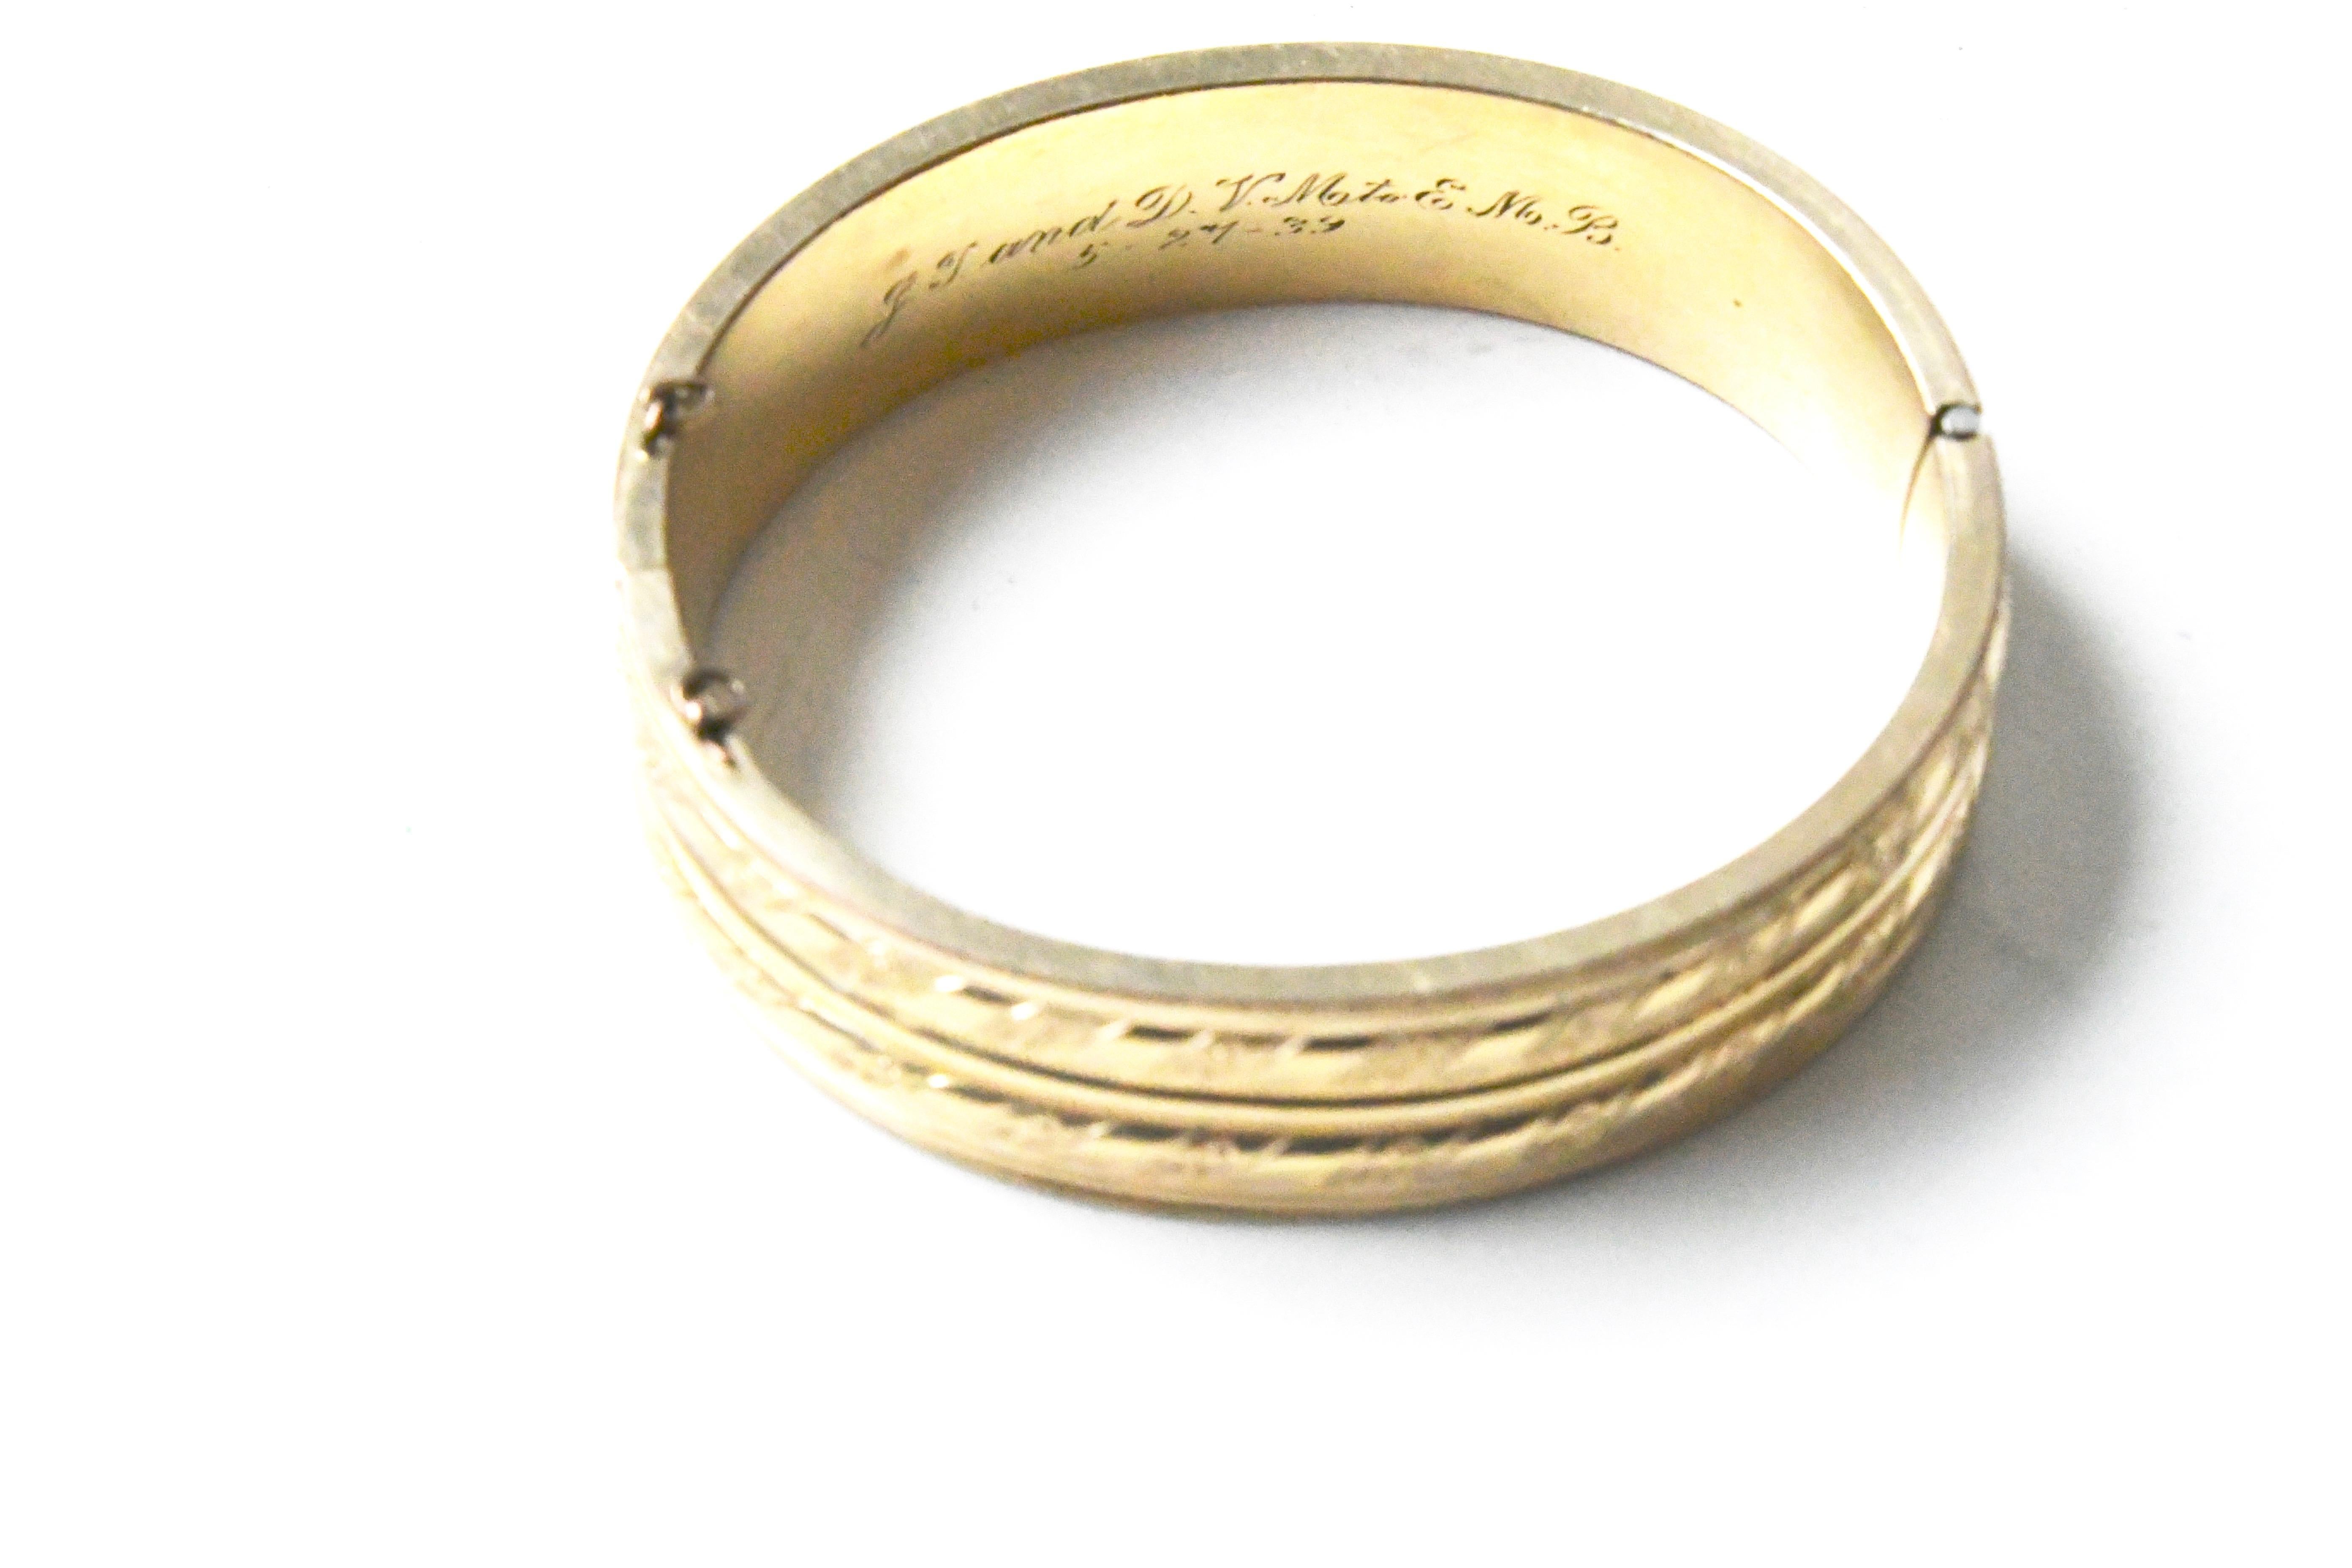 Inscribed antique vermeil bangle with scrolling and stripe details. Missing the original safety chain. Inscribed 39, probably 1839.  Marked inside appears to say 20 and 10K.  Clasp is working well. About .6